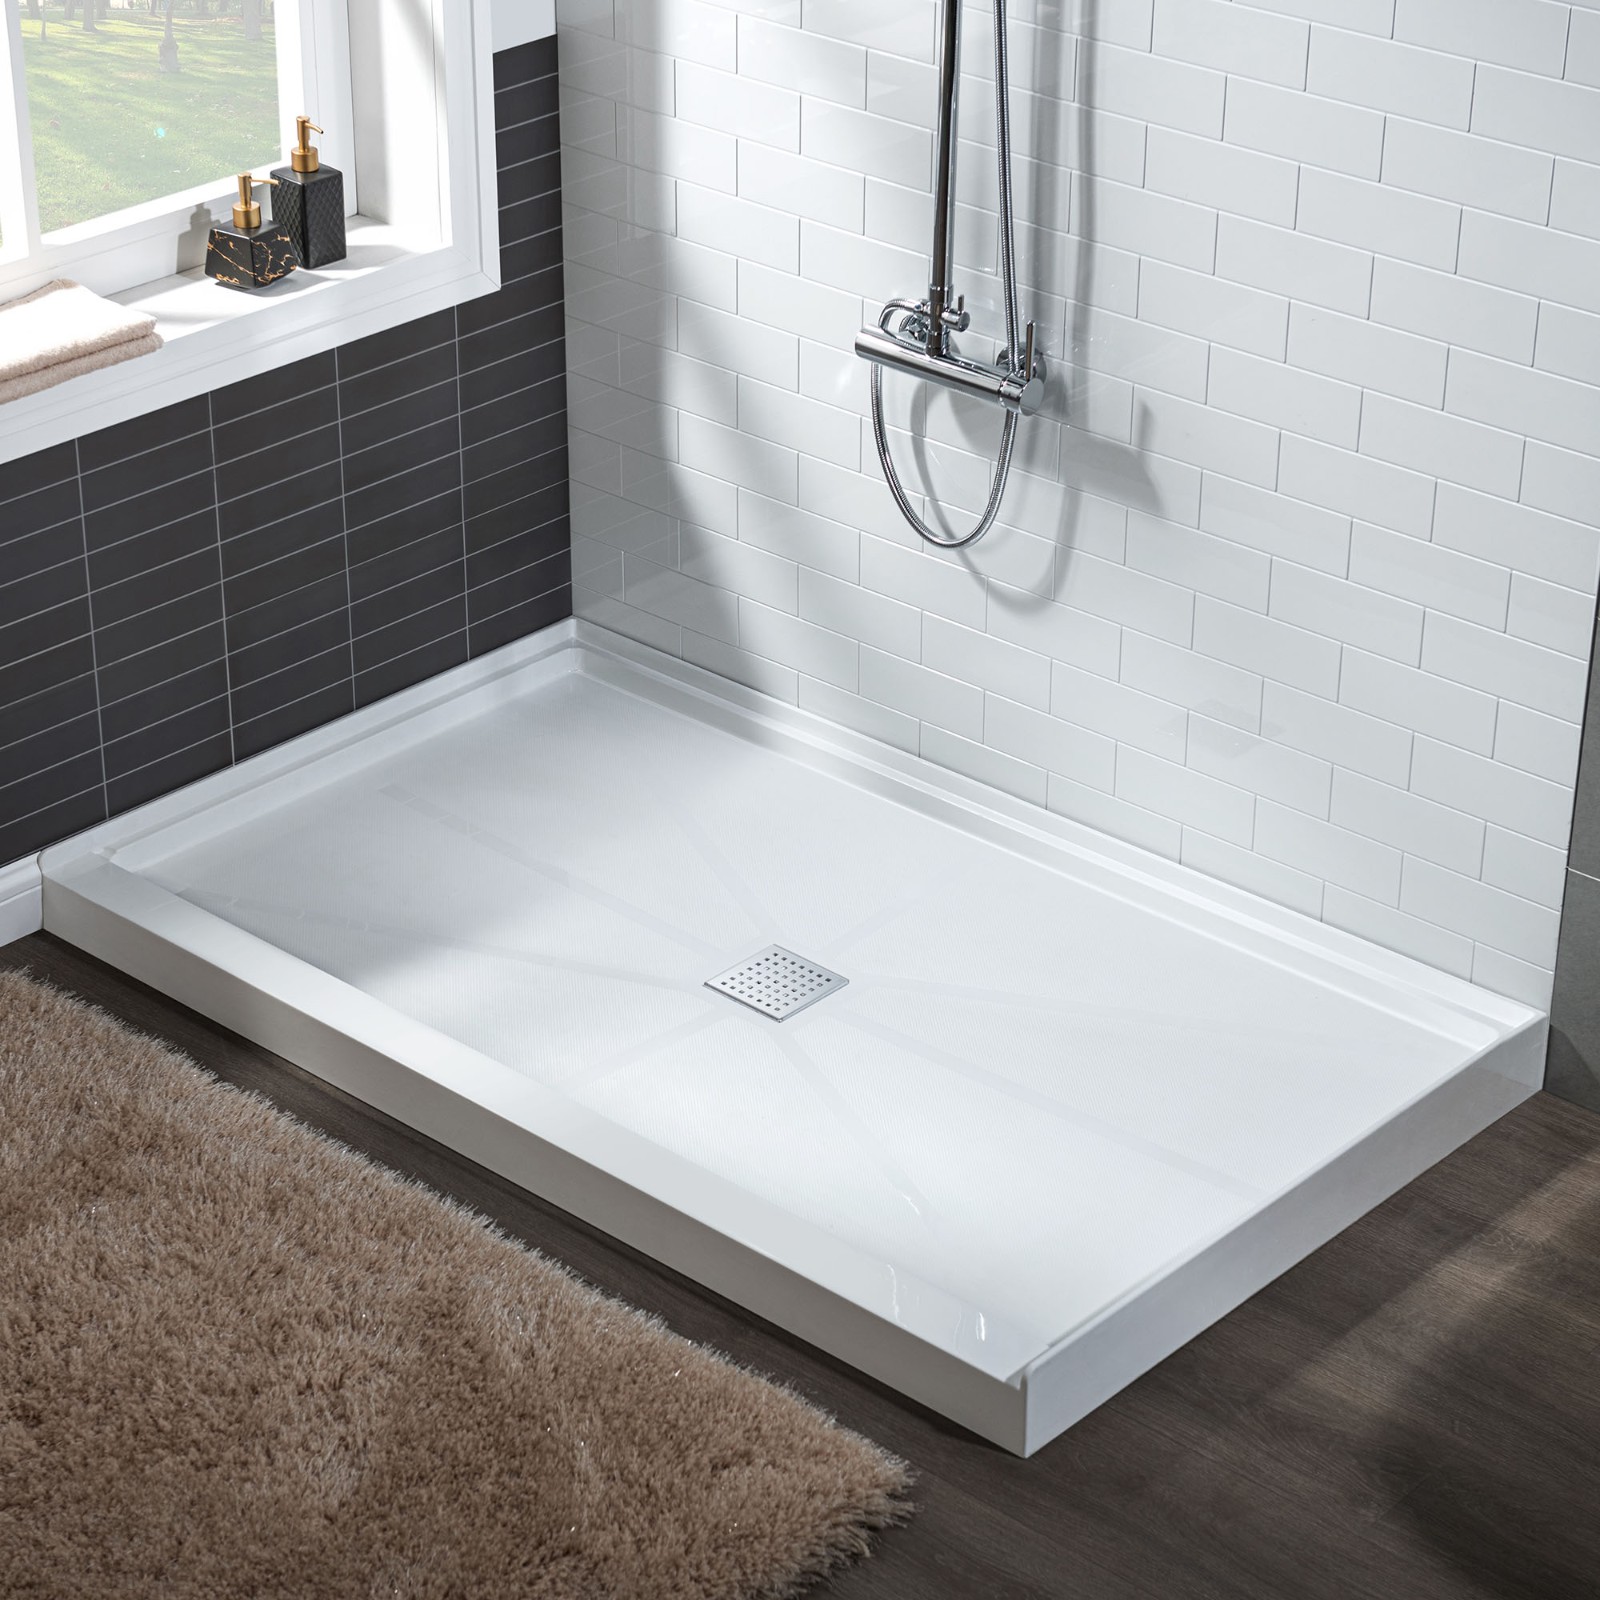  WOODBRIDGE SBR4836-1000C-CH SolidSurface Shower Base with Recessed Trench Side Including  Chrome Linear Cover, 48